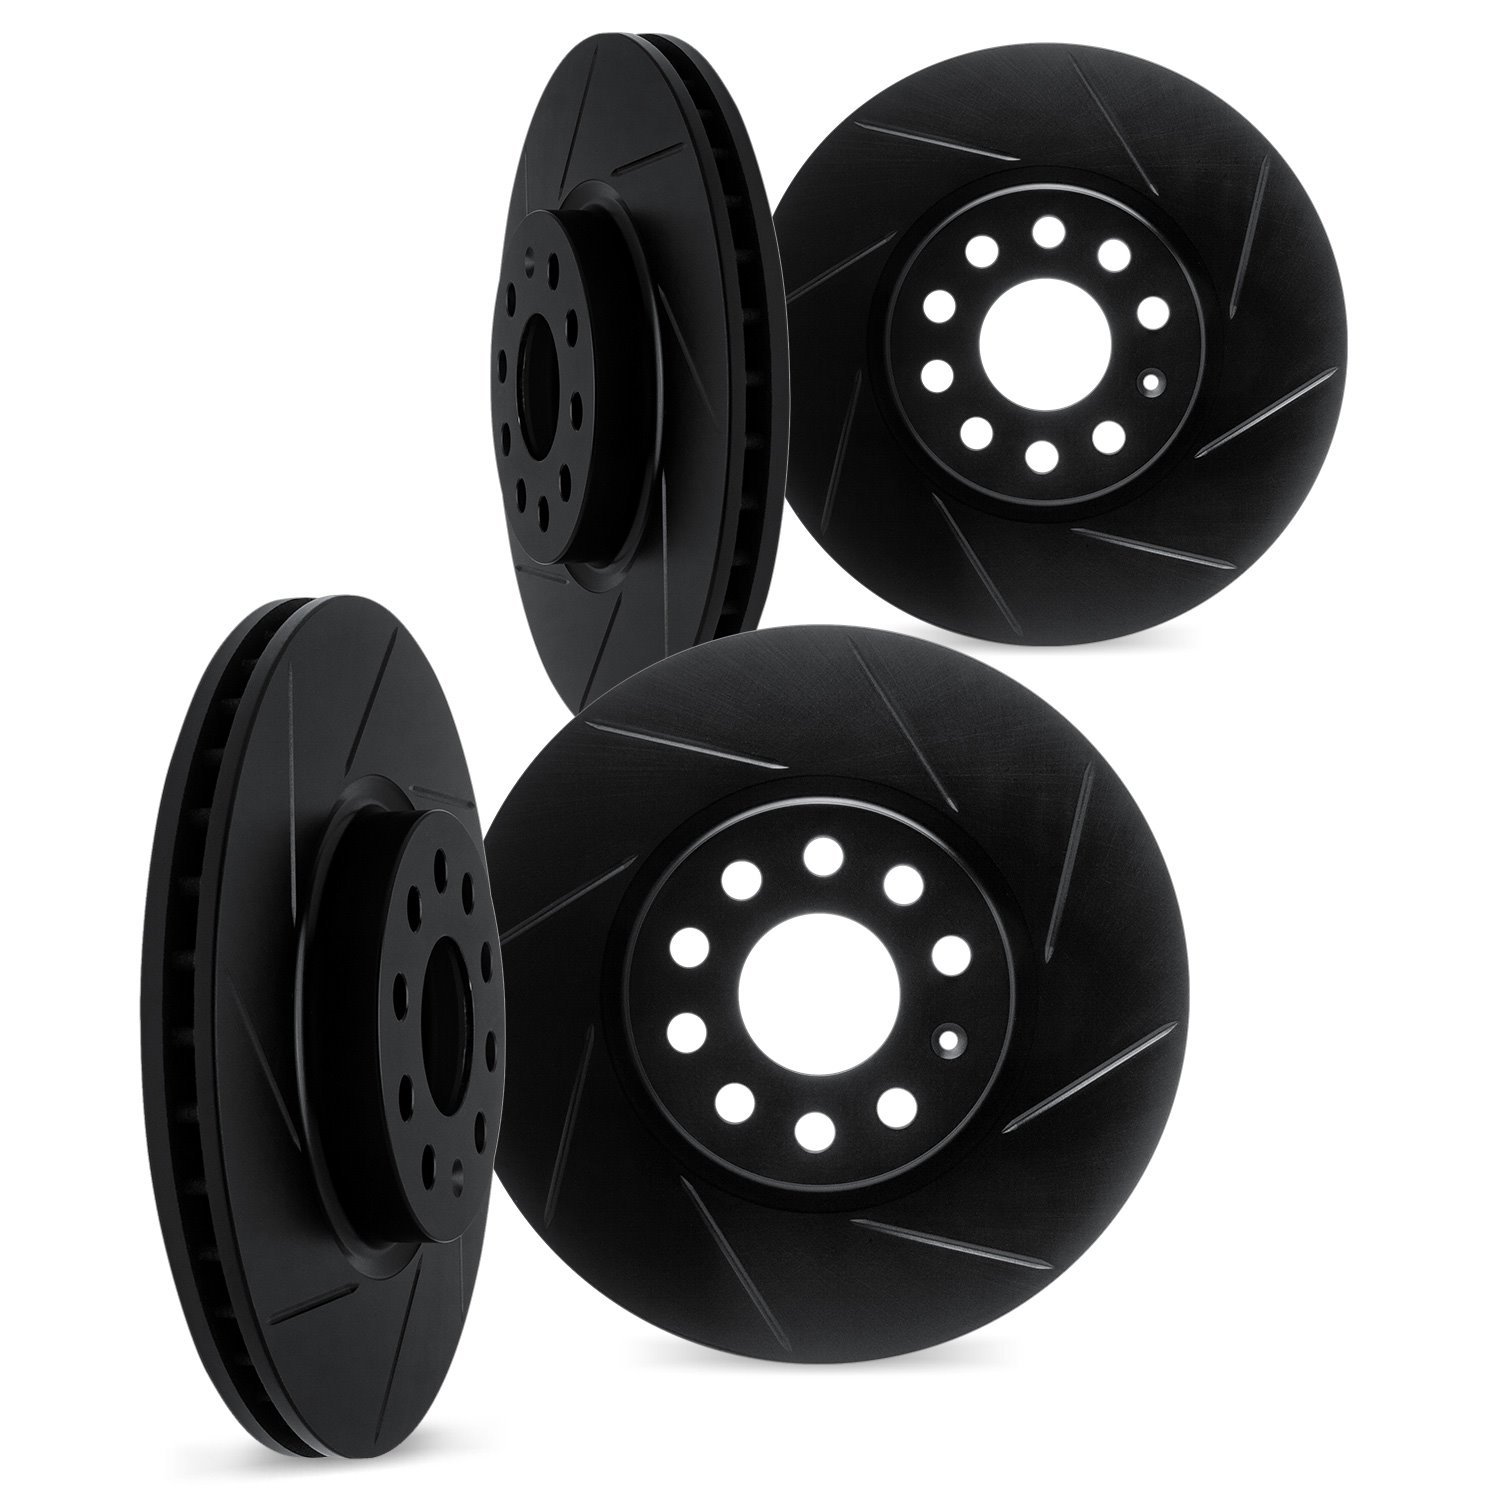 3004-67001 Slotted Brake Rotors [Black], Fits Select Infiniti/Nissan, Position: Front and Rear